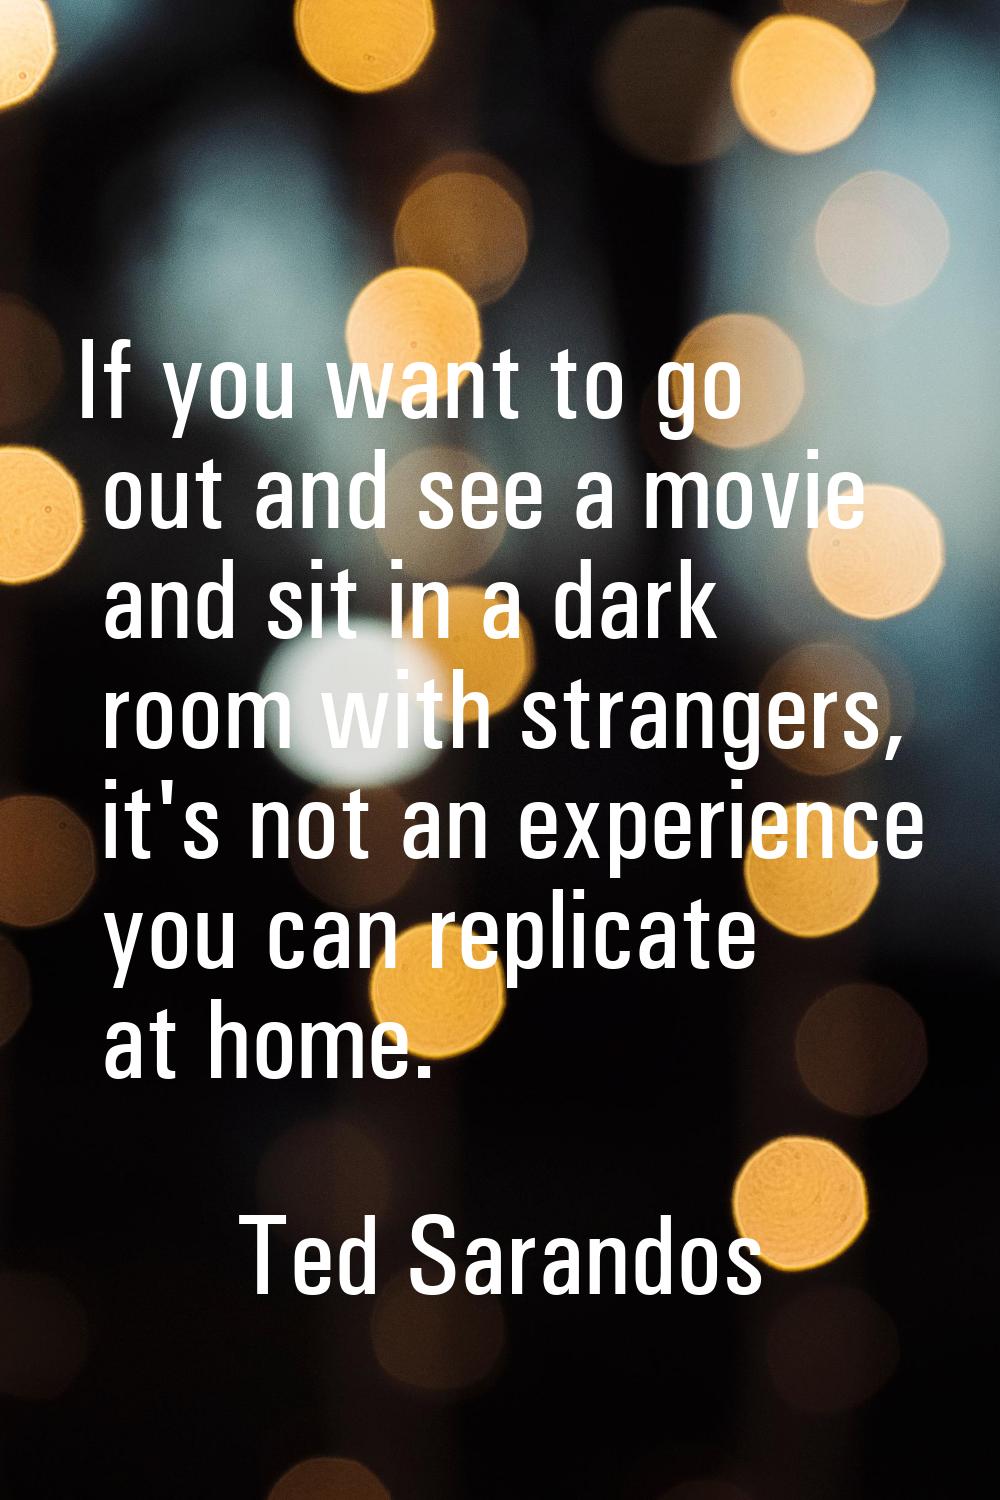 If you want to go out and see a movie and sit in a dark room with strangers, it's not an experience